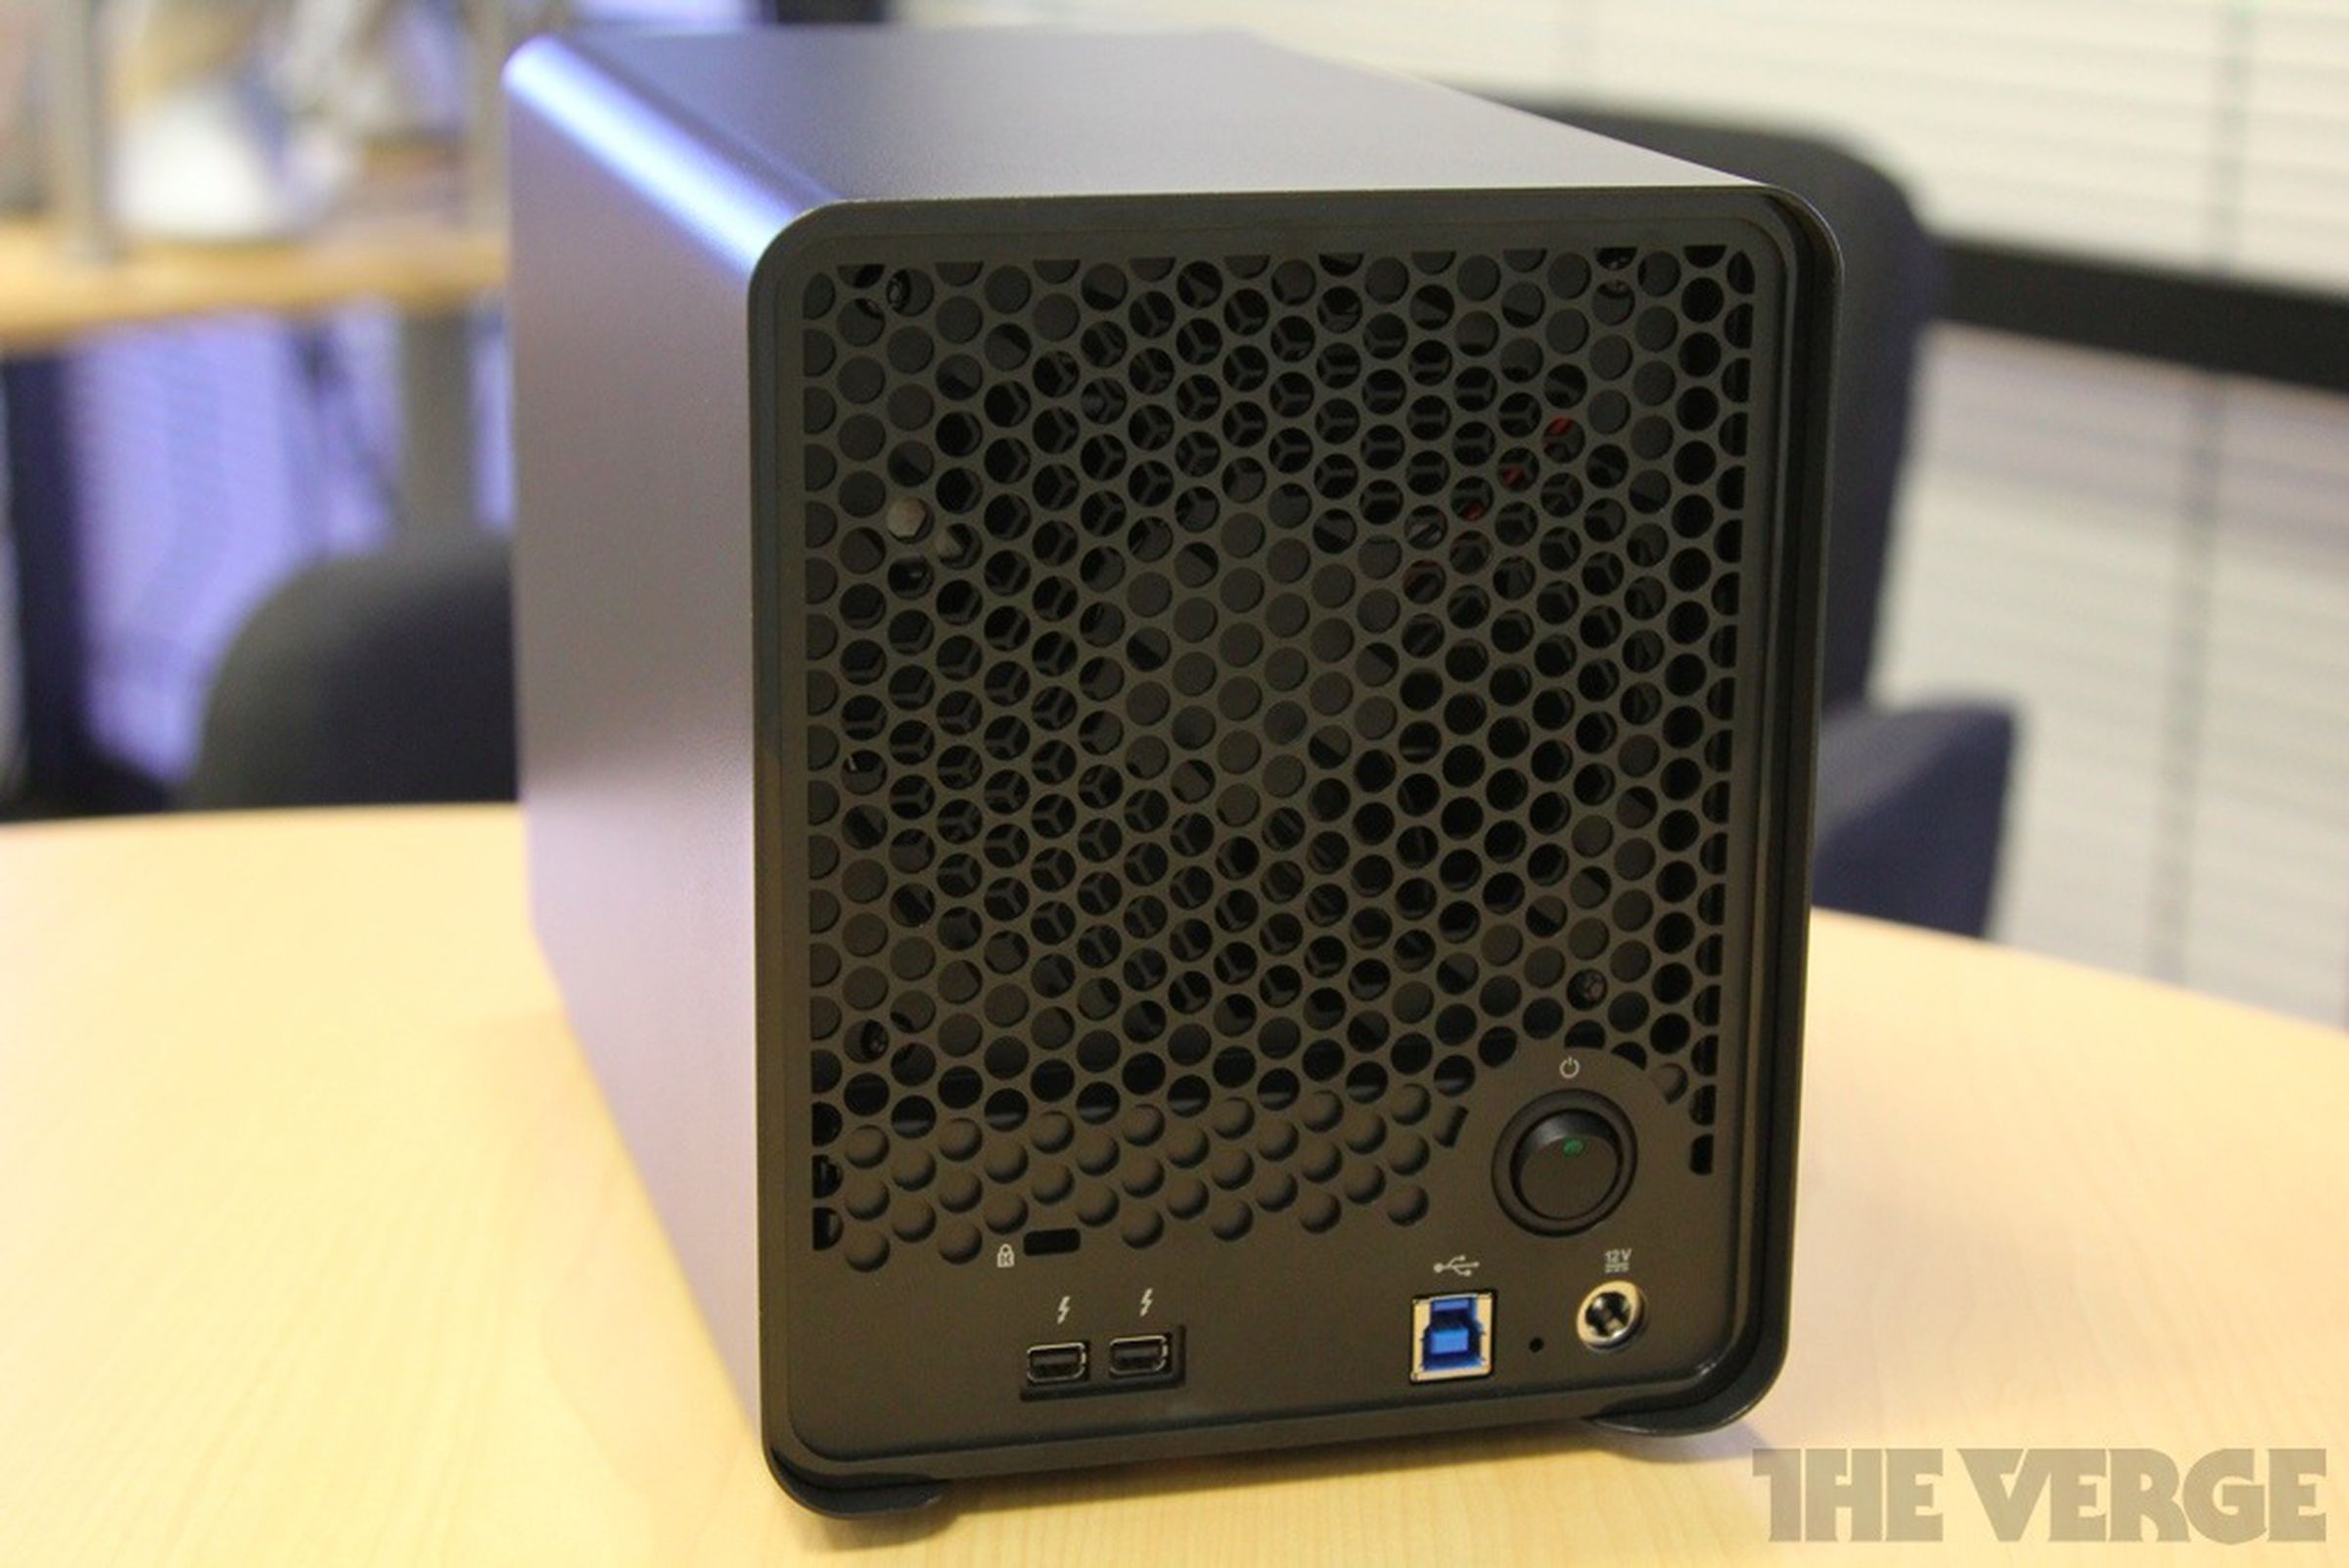 Drobo Mini and Drobo 5D hands-on pictures